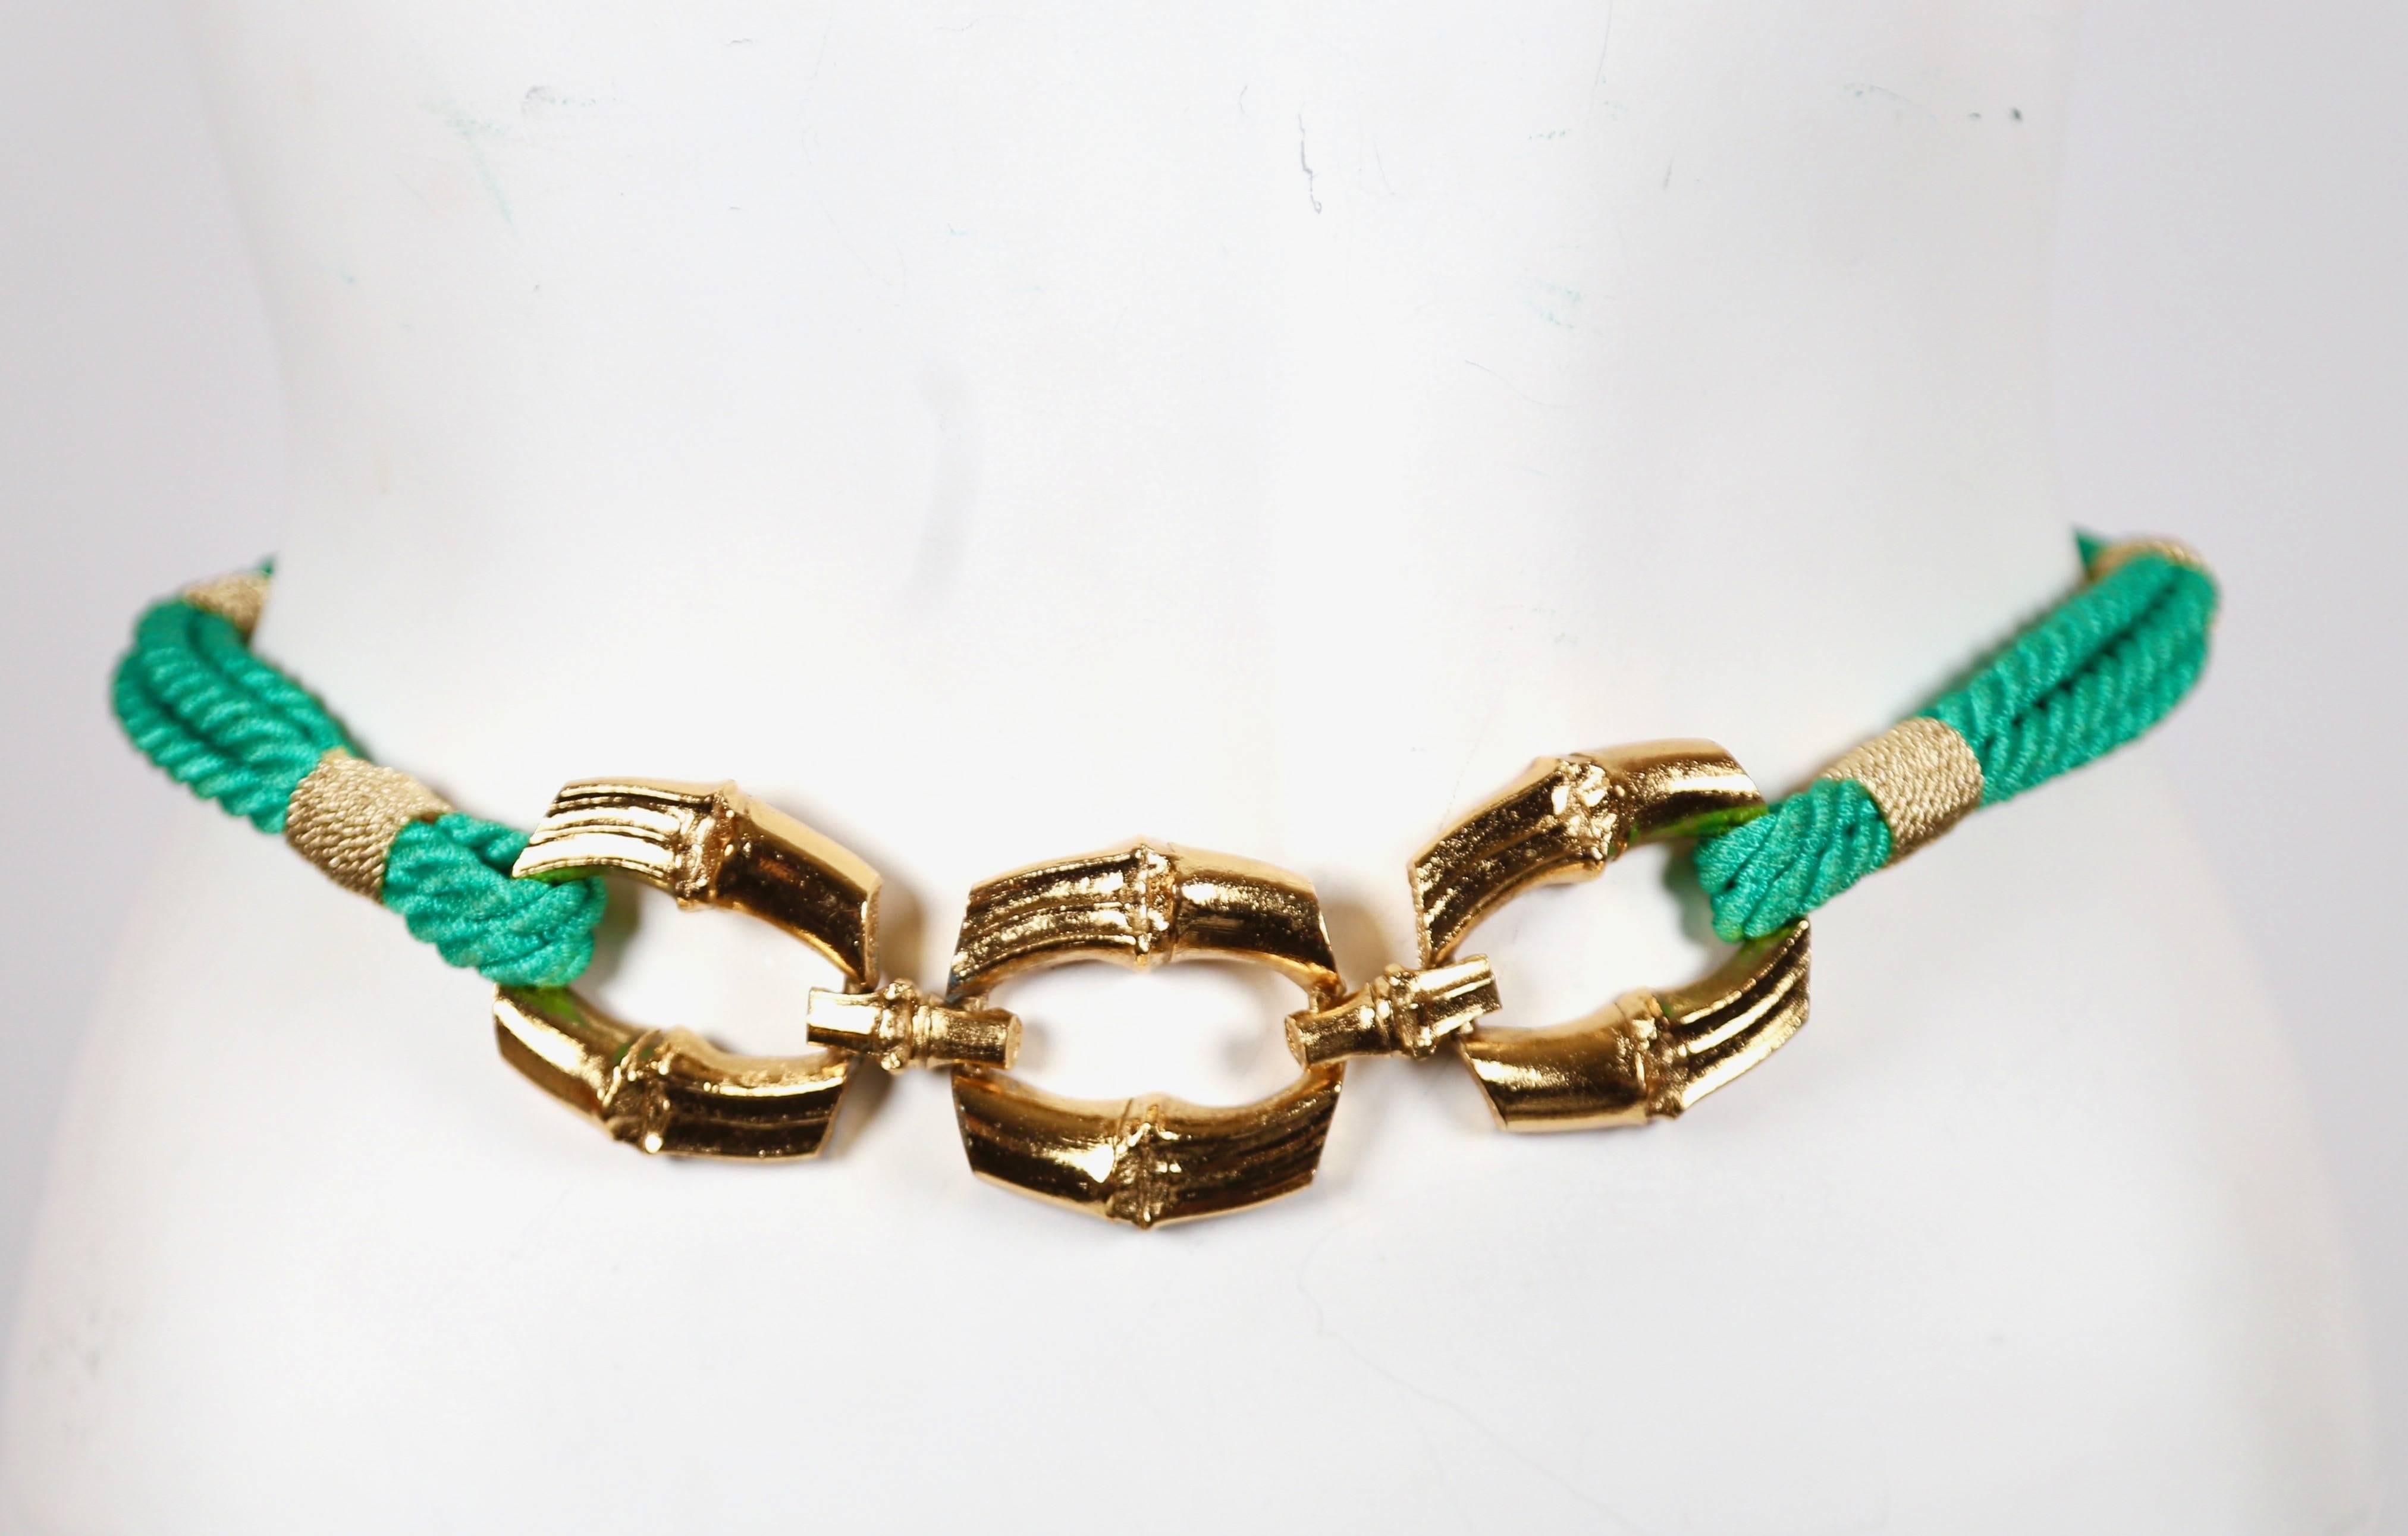 Vivid green, woven cord belt with gilt bamboo buckle designed by Yves Saint Laurent dating to the 1980's. Belt is not stamped however authenticity is guaranteed. Color is more vivid in person. Approximate length 26.5-27